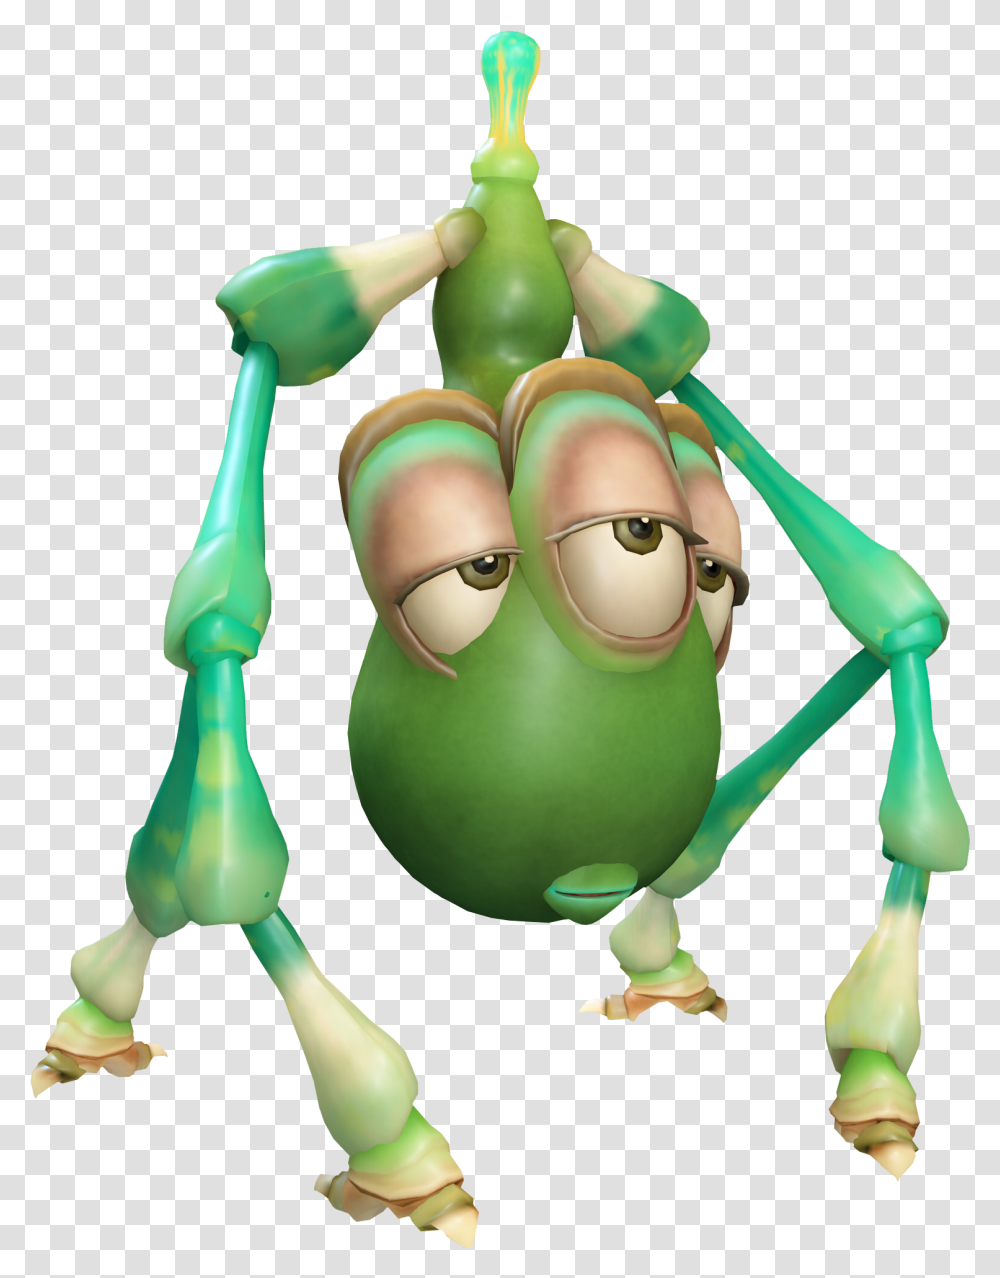 Spore Hd Texture Pack, Green, Toy, Elf, Sunglasses Transparent Png